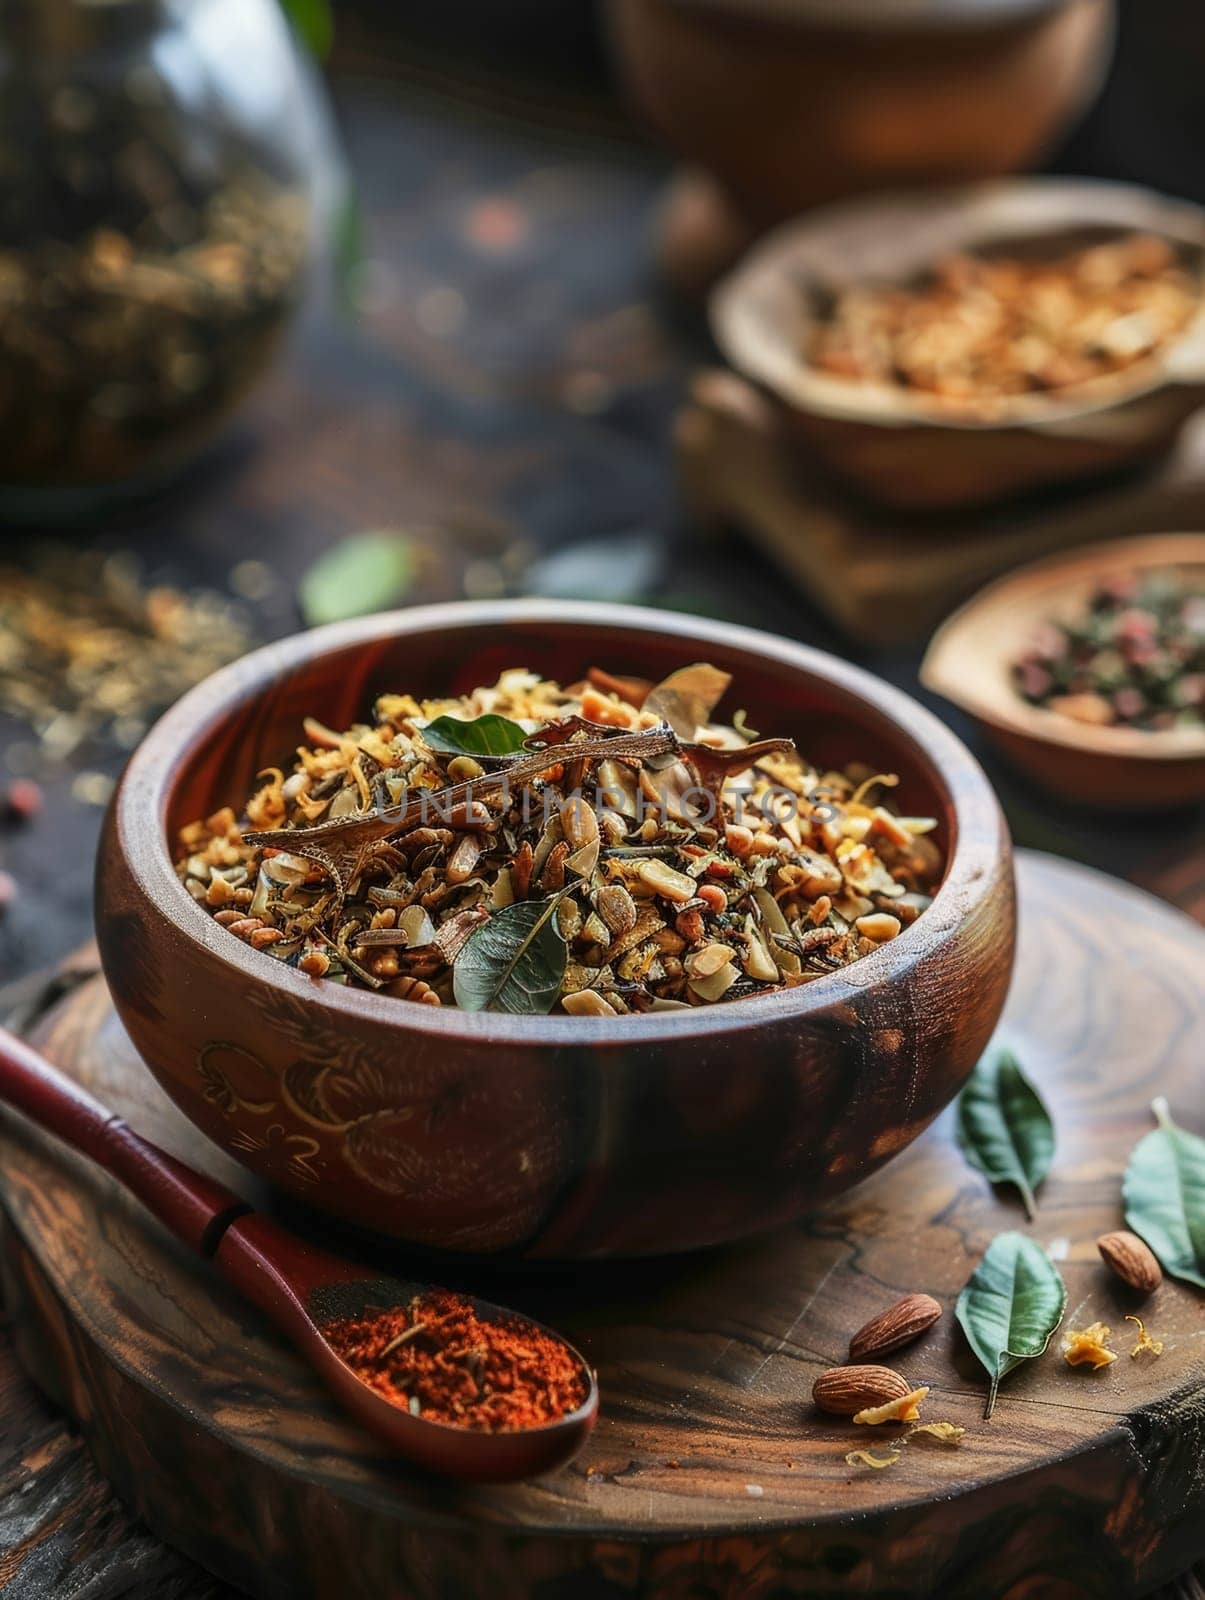 Burmese lahpet thoke or tea leaf salad, made with fermented tea leaves, crunchy nuts, seeds, and other fresh ingredients, served in an authentic wooden bowl. by sfinks